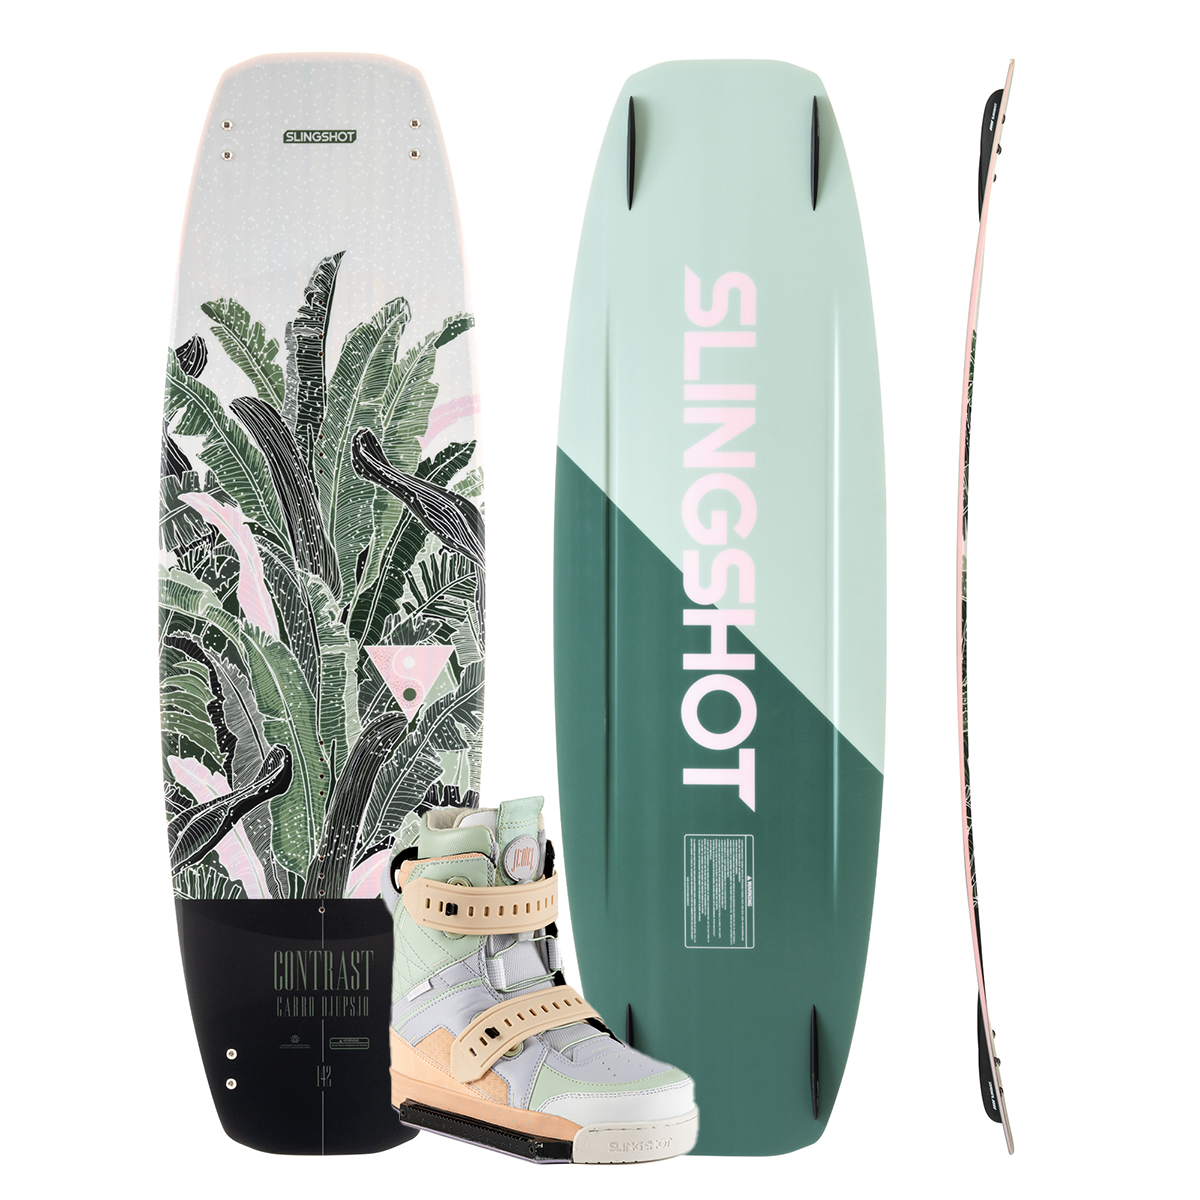 Slingshot Contrast Wakeboard package with Jewel Boots